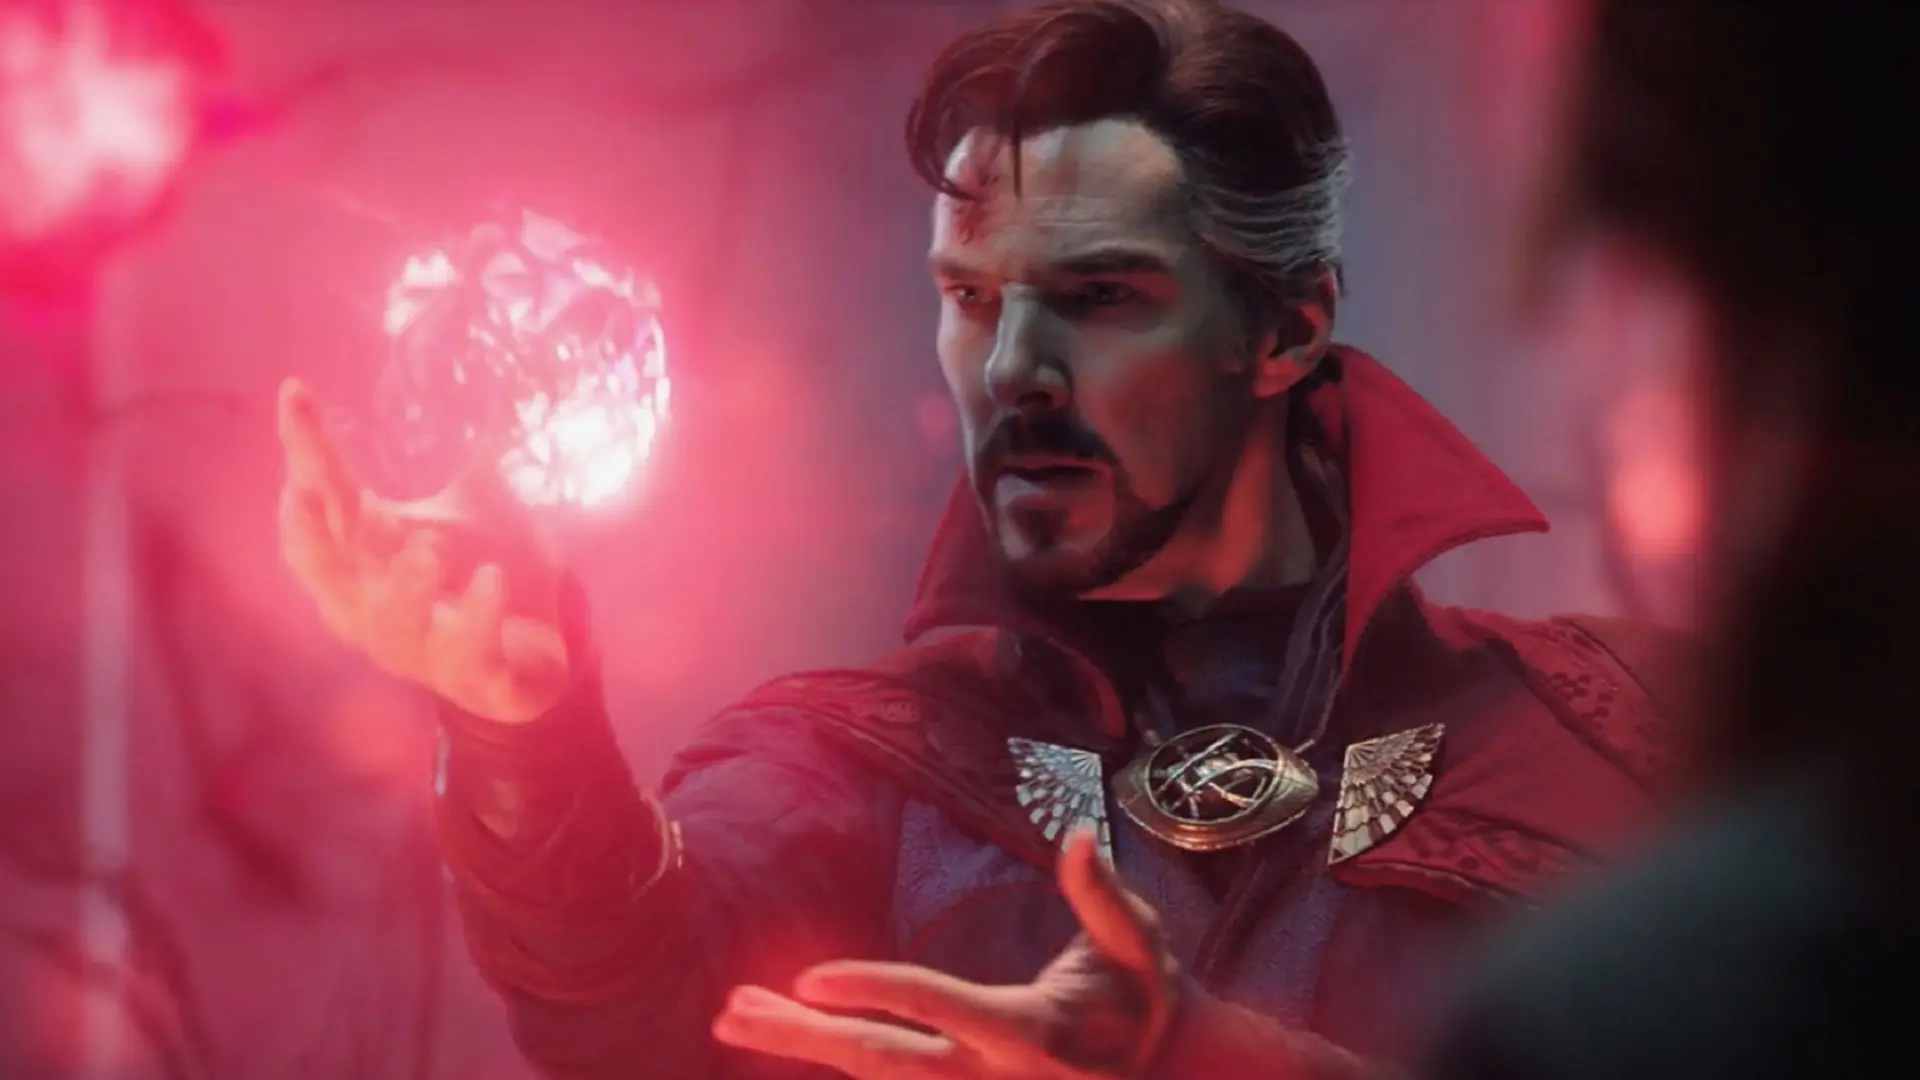 What series and movies did you watch at Disney Plus to understand Doctor Strange 2